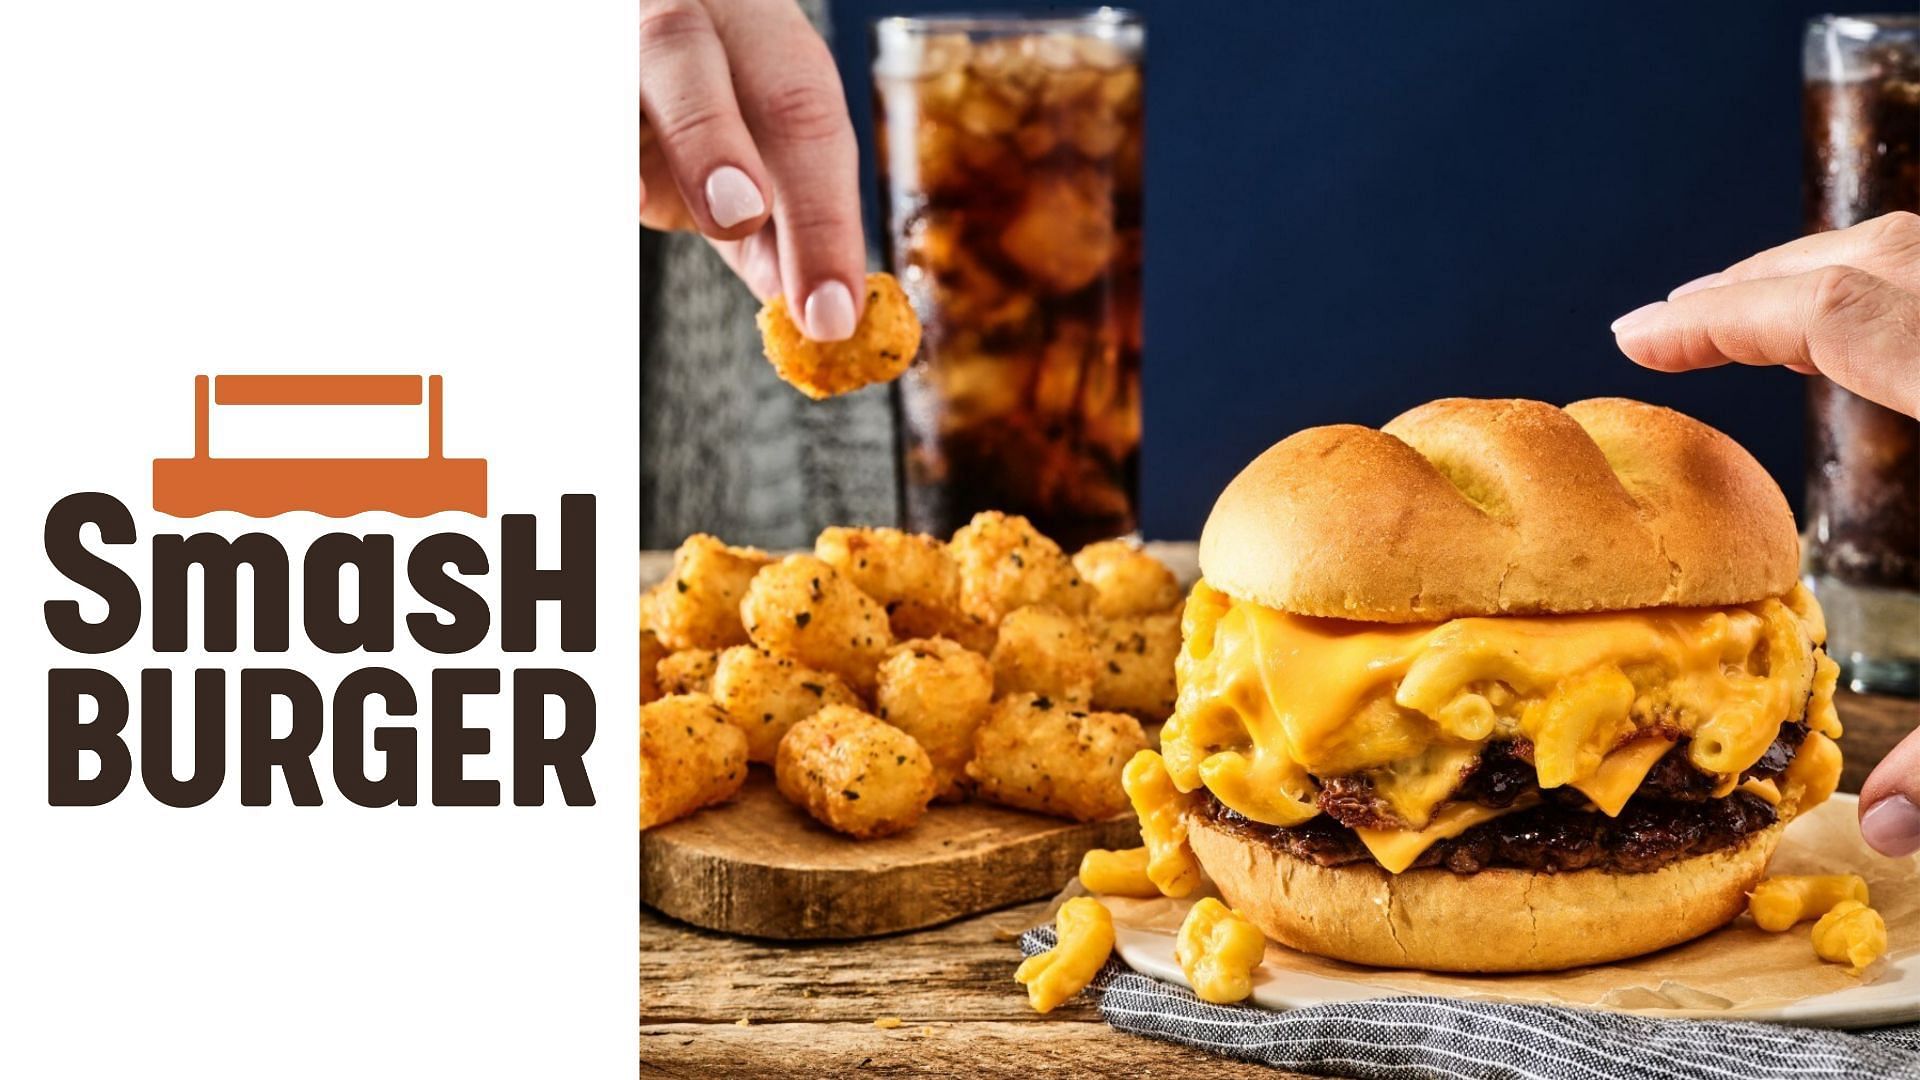 Smashburger introduces the new S